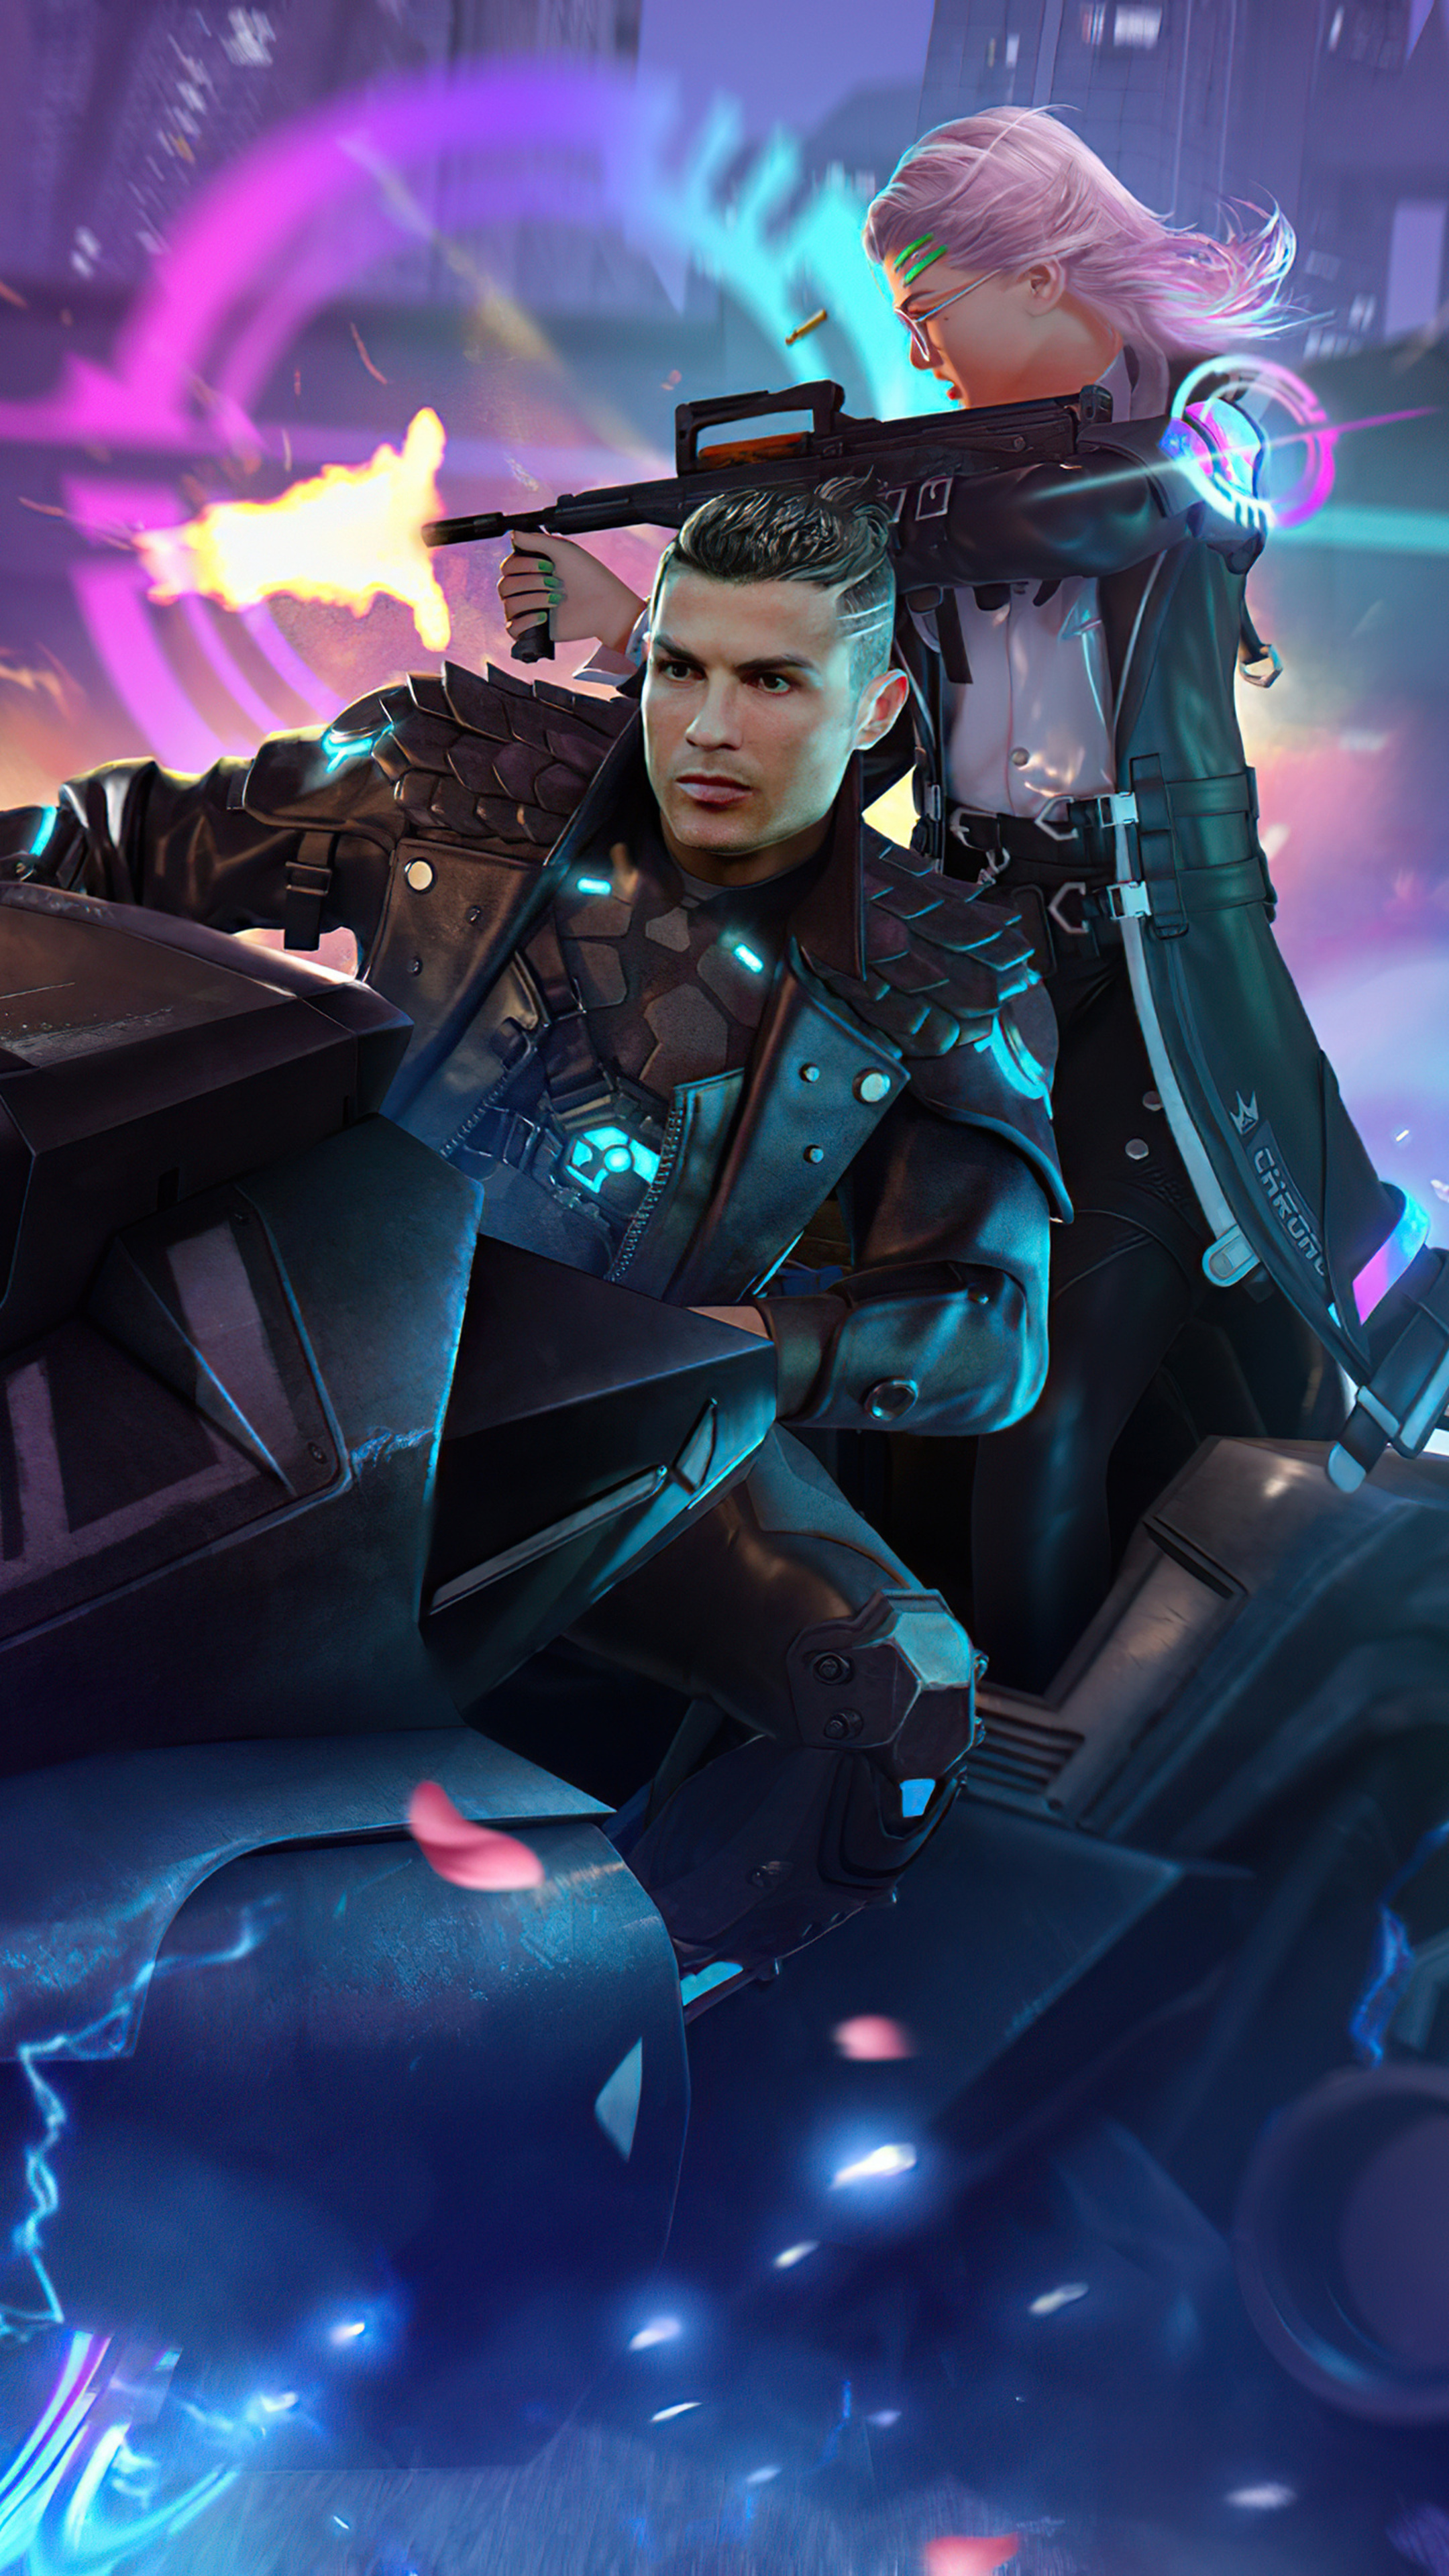 Cristiano Ronaldo in Free Fire, 5K Xperia wallpapers, Stunning artwork, Iconic collaboration, 2160x3840 4K Phone